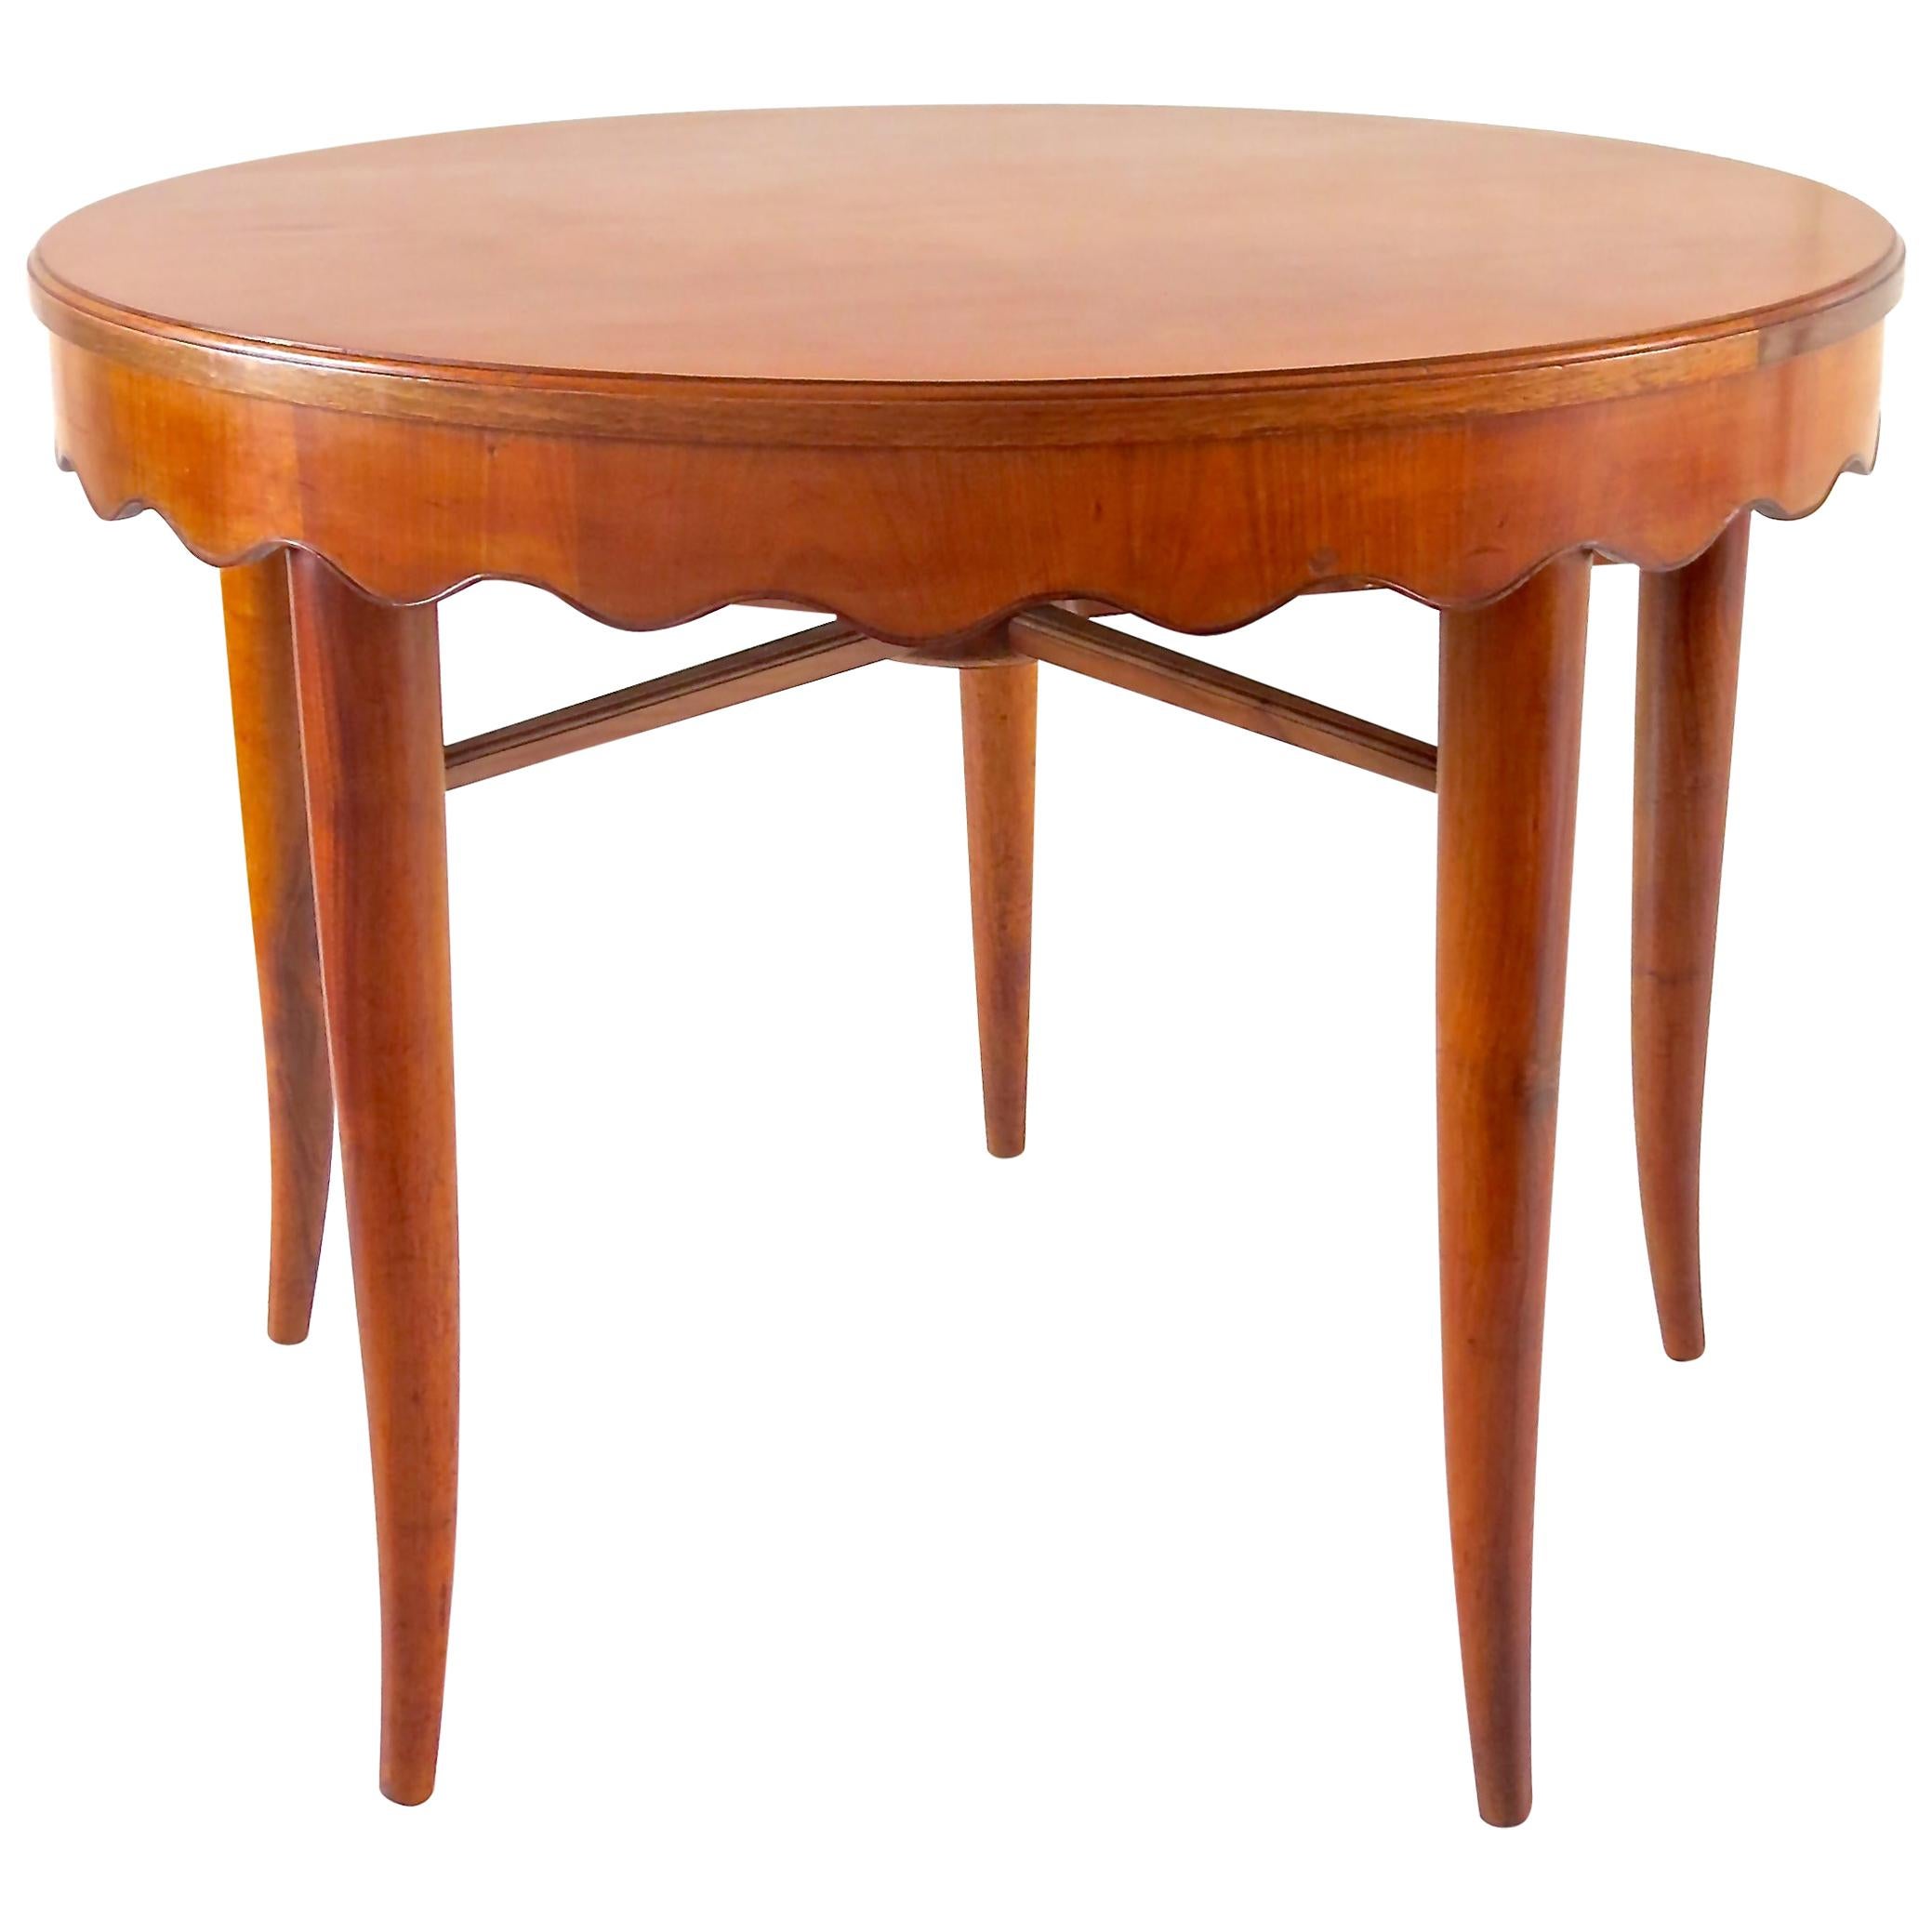 Paolo Buffa Unique Round Dining Table Cherrywood, 1950